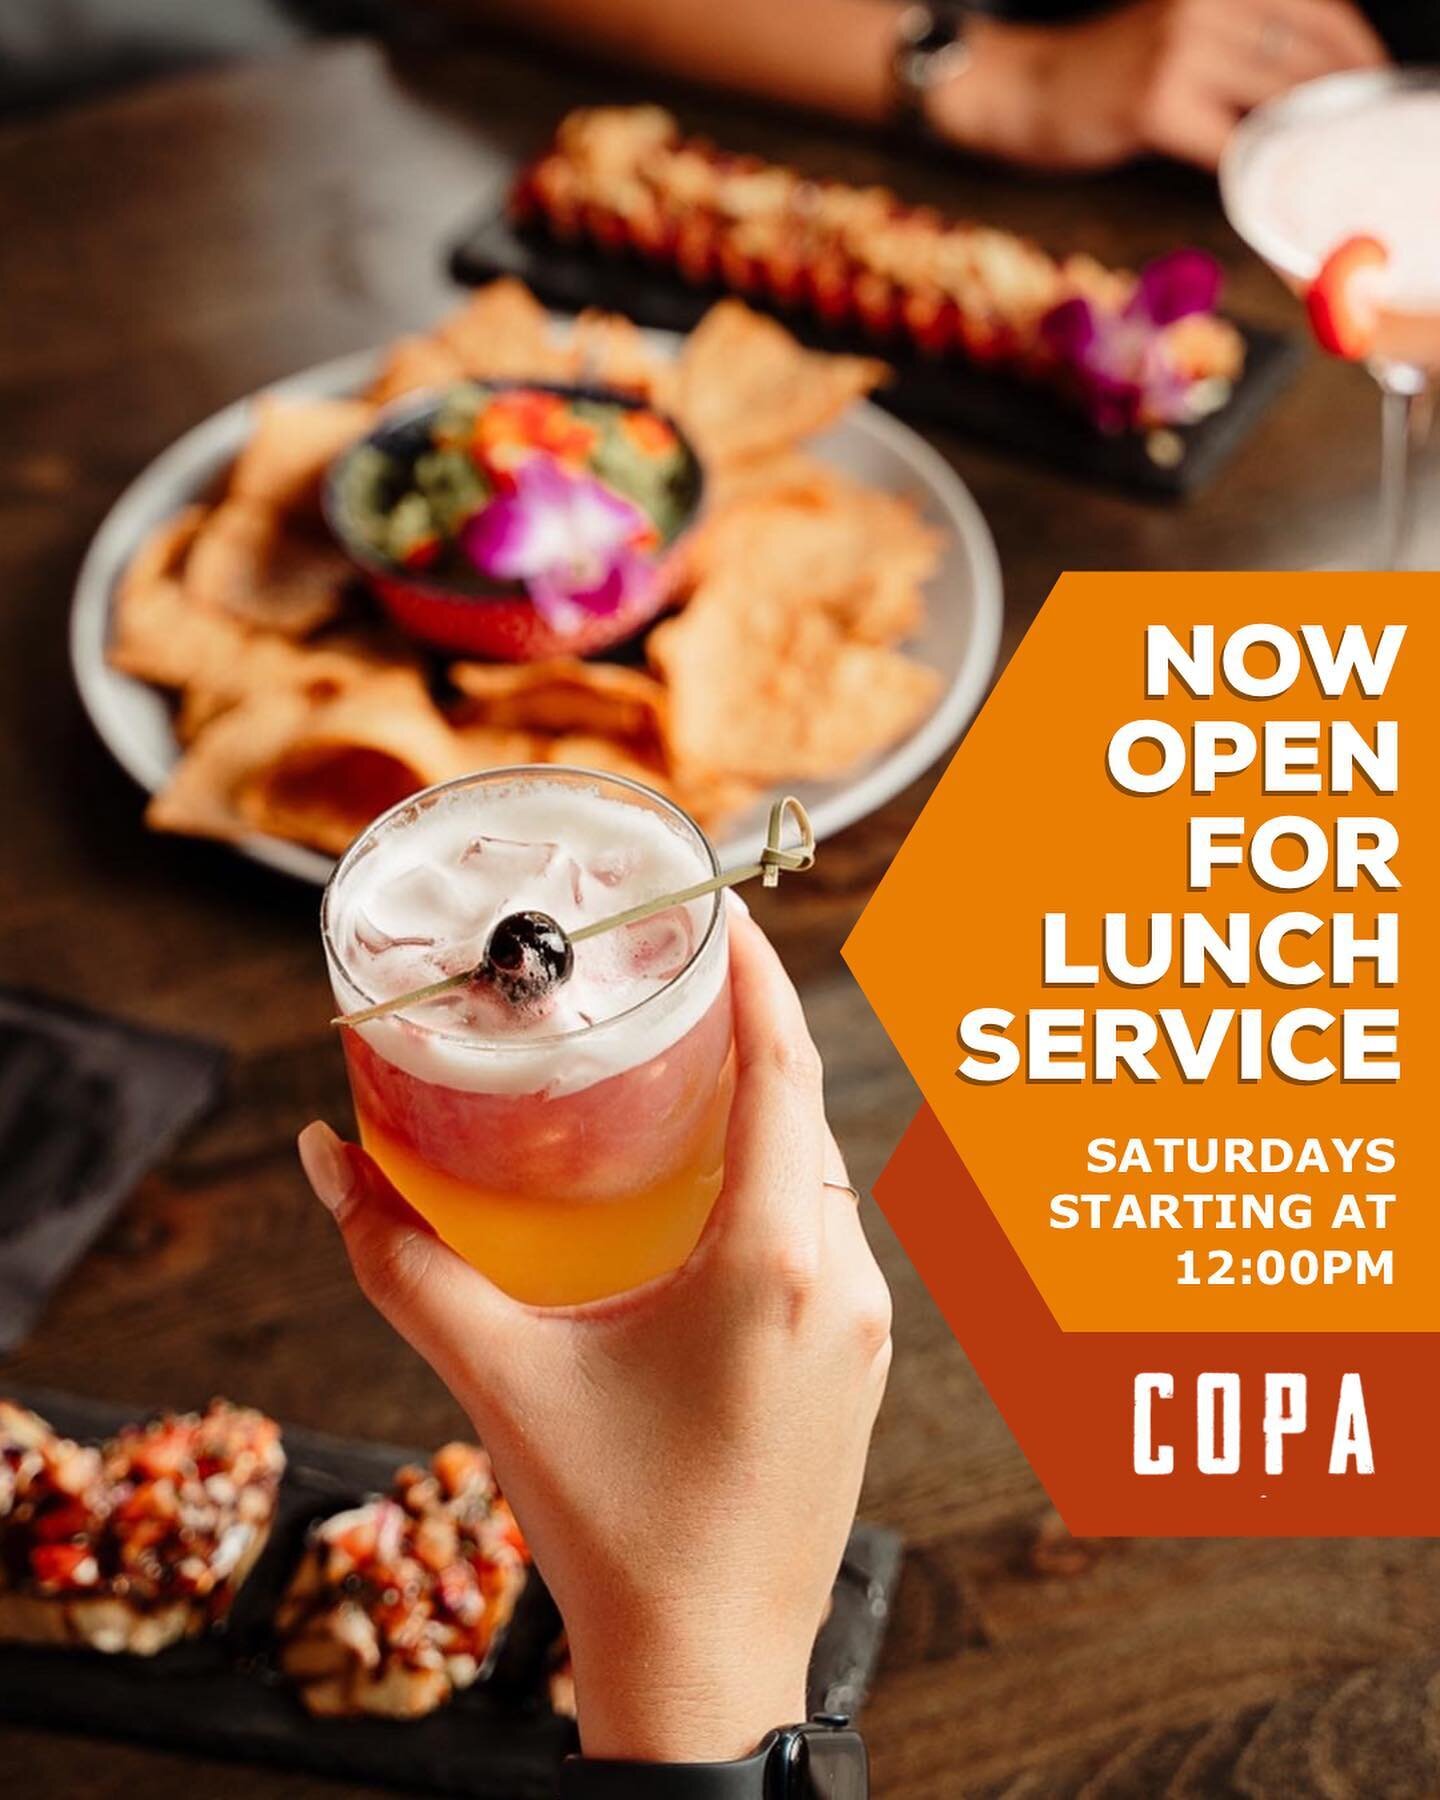 Same great service, tapas and cocktails! 💃🏽
Now Earlier! Join us for lunch every Saturday starting at 12:00 NOON!

#copadtsp #copa #copaamor